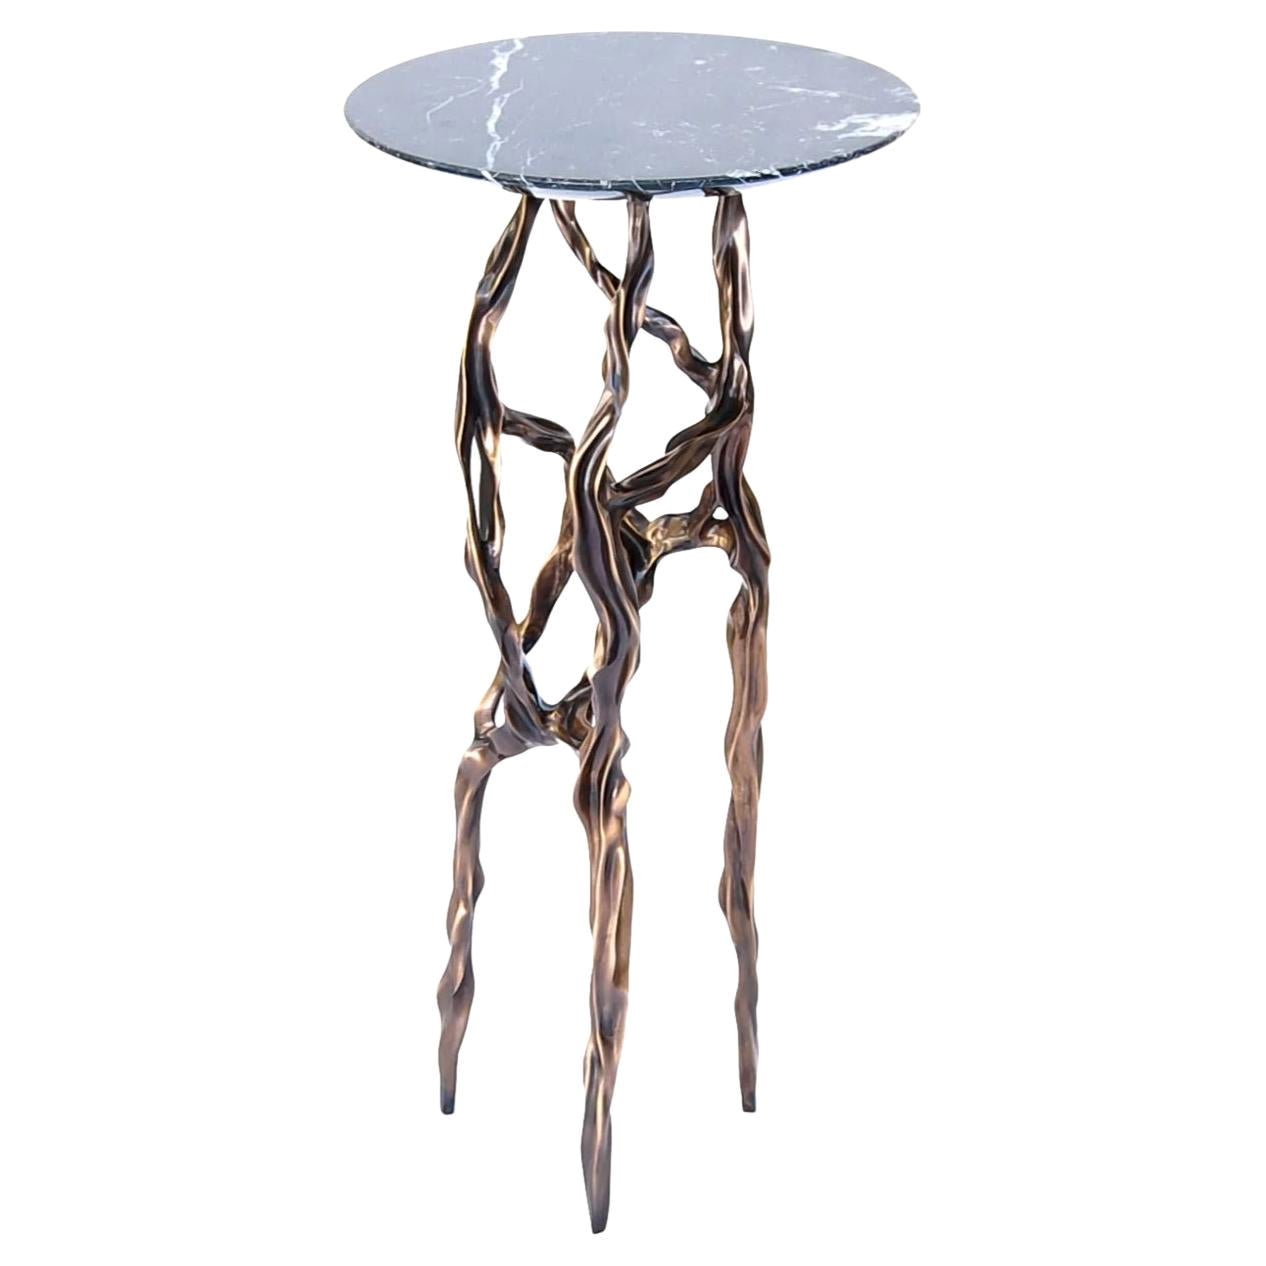 Alexia Drink Table with Nero Marquina Marble Top by Fakasaka Design For Sale